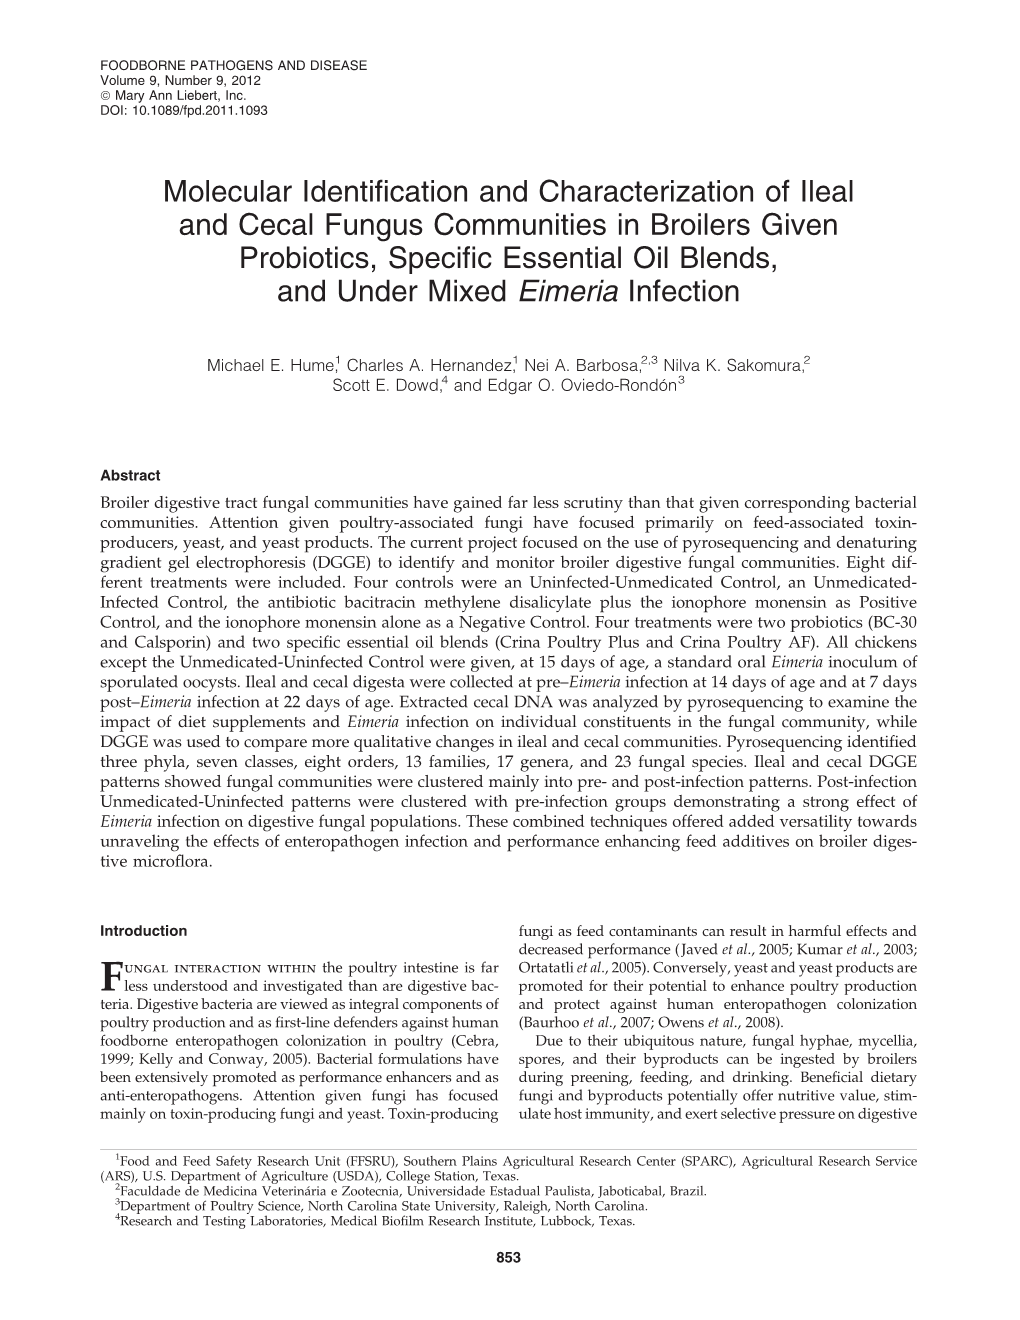 Molecular Identification and Characterization of Ileal and Cecal Fungus Communities in Broilers Given Probiotics, Specific Essen